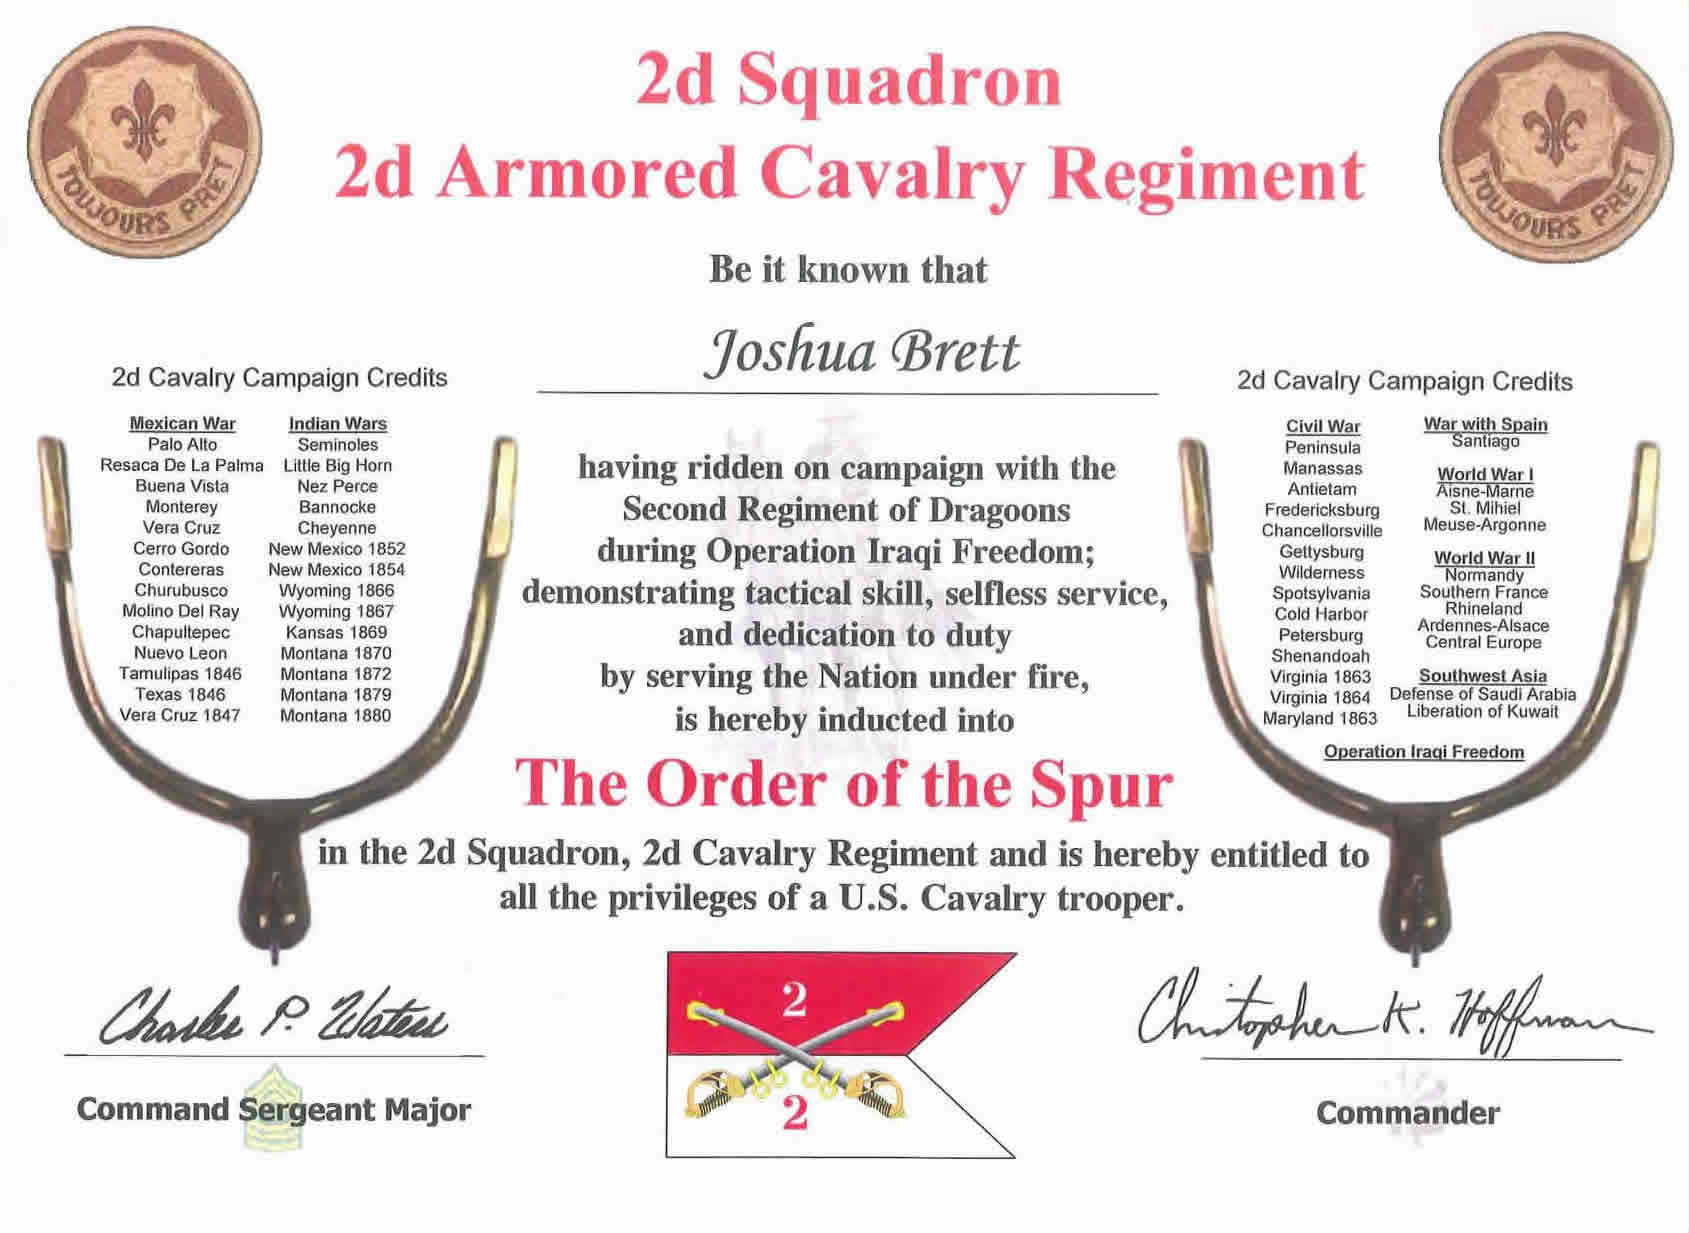 The Order of the Spur